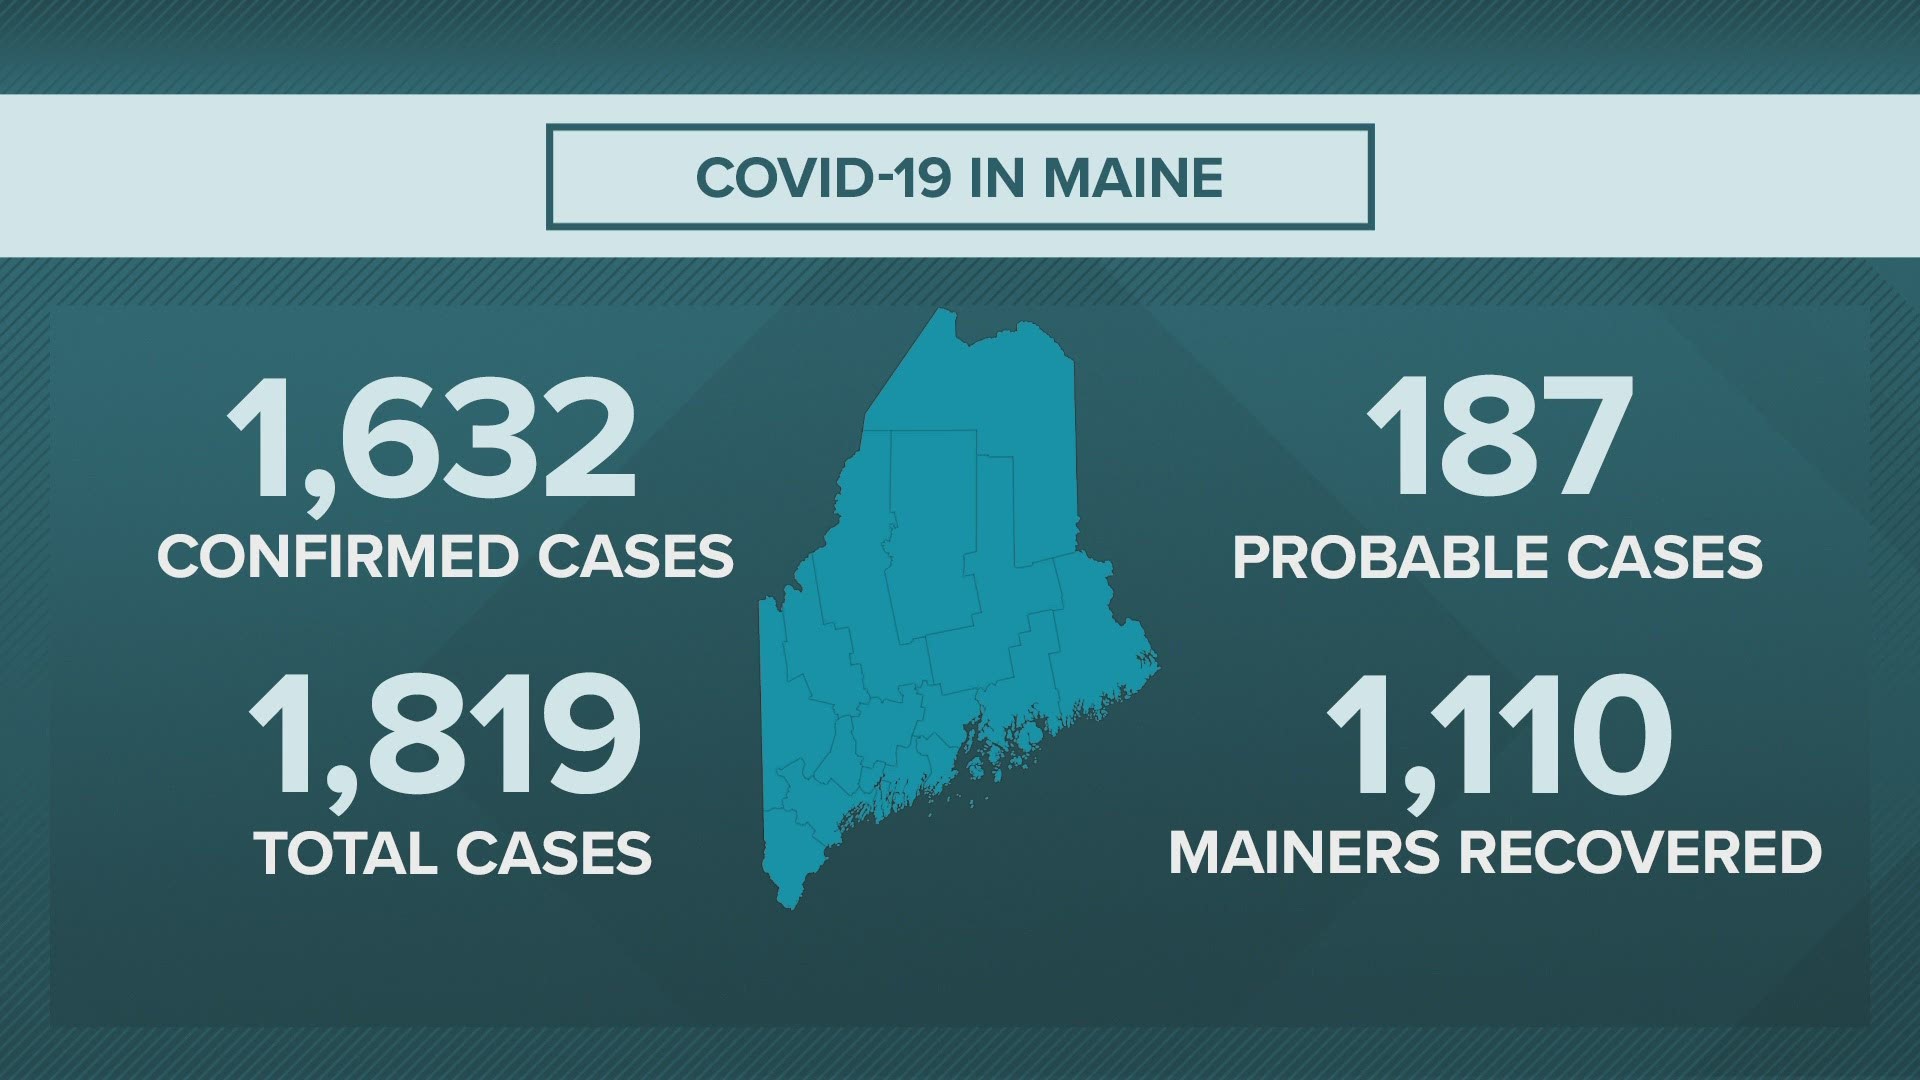 Maine CDC COVID-19 outbreak numbers for 05/20/20.